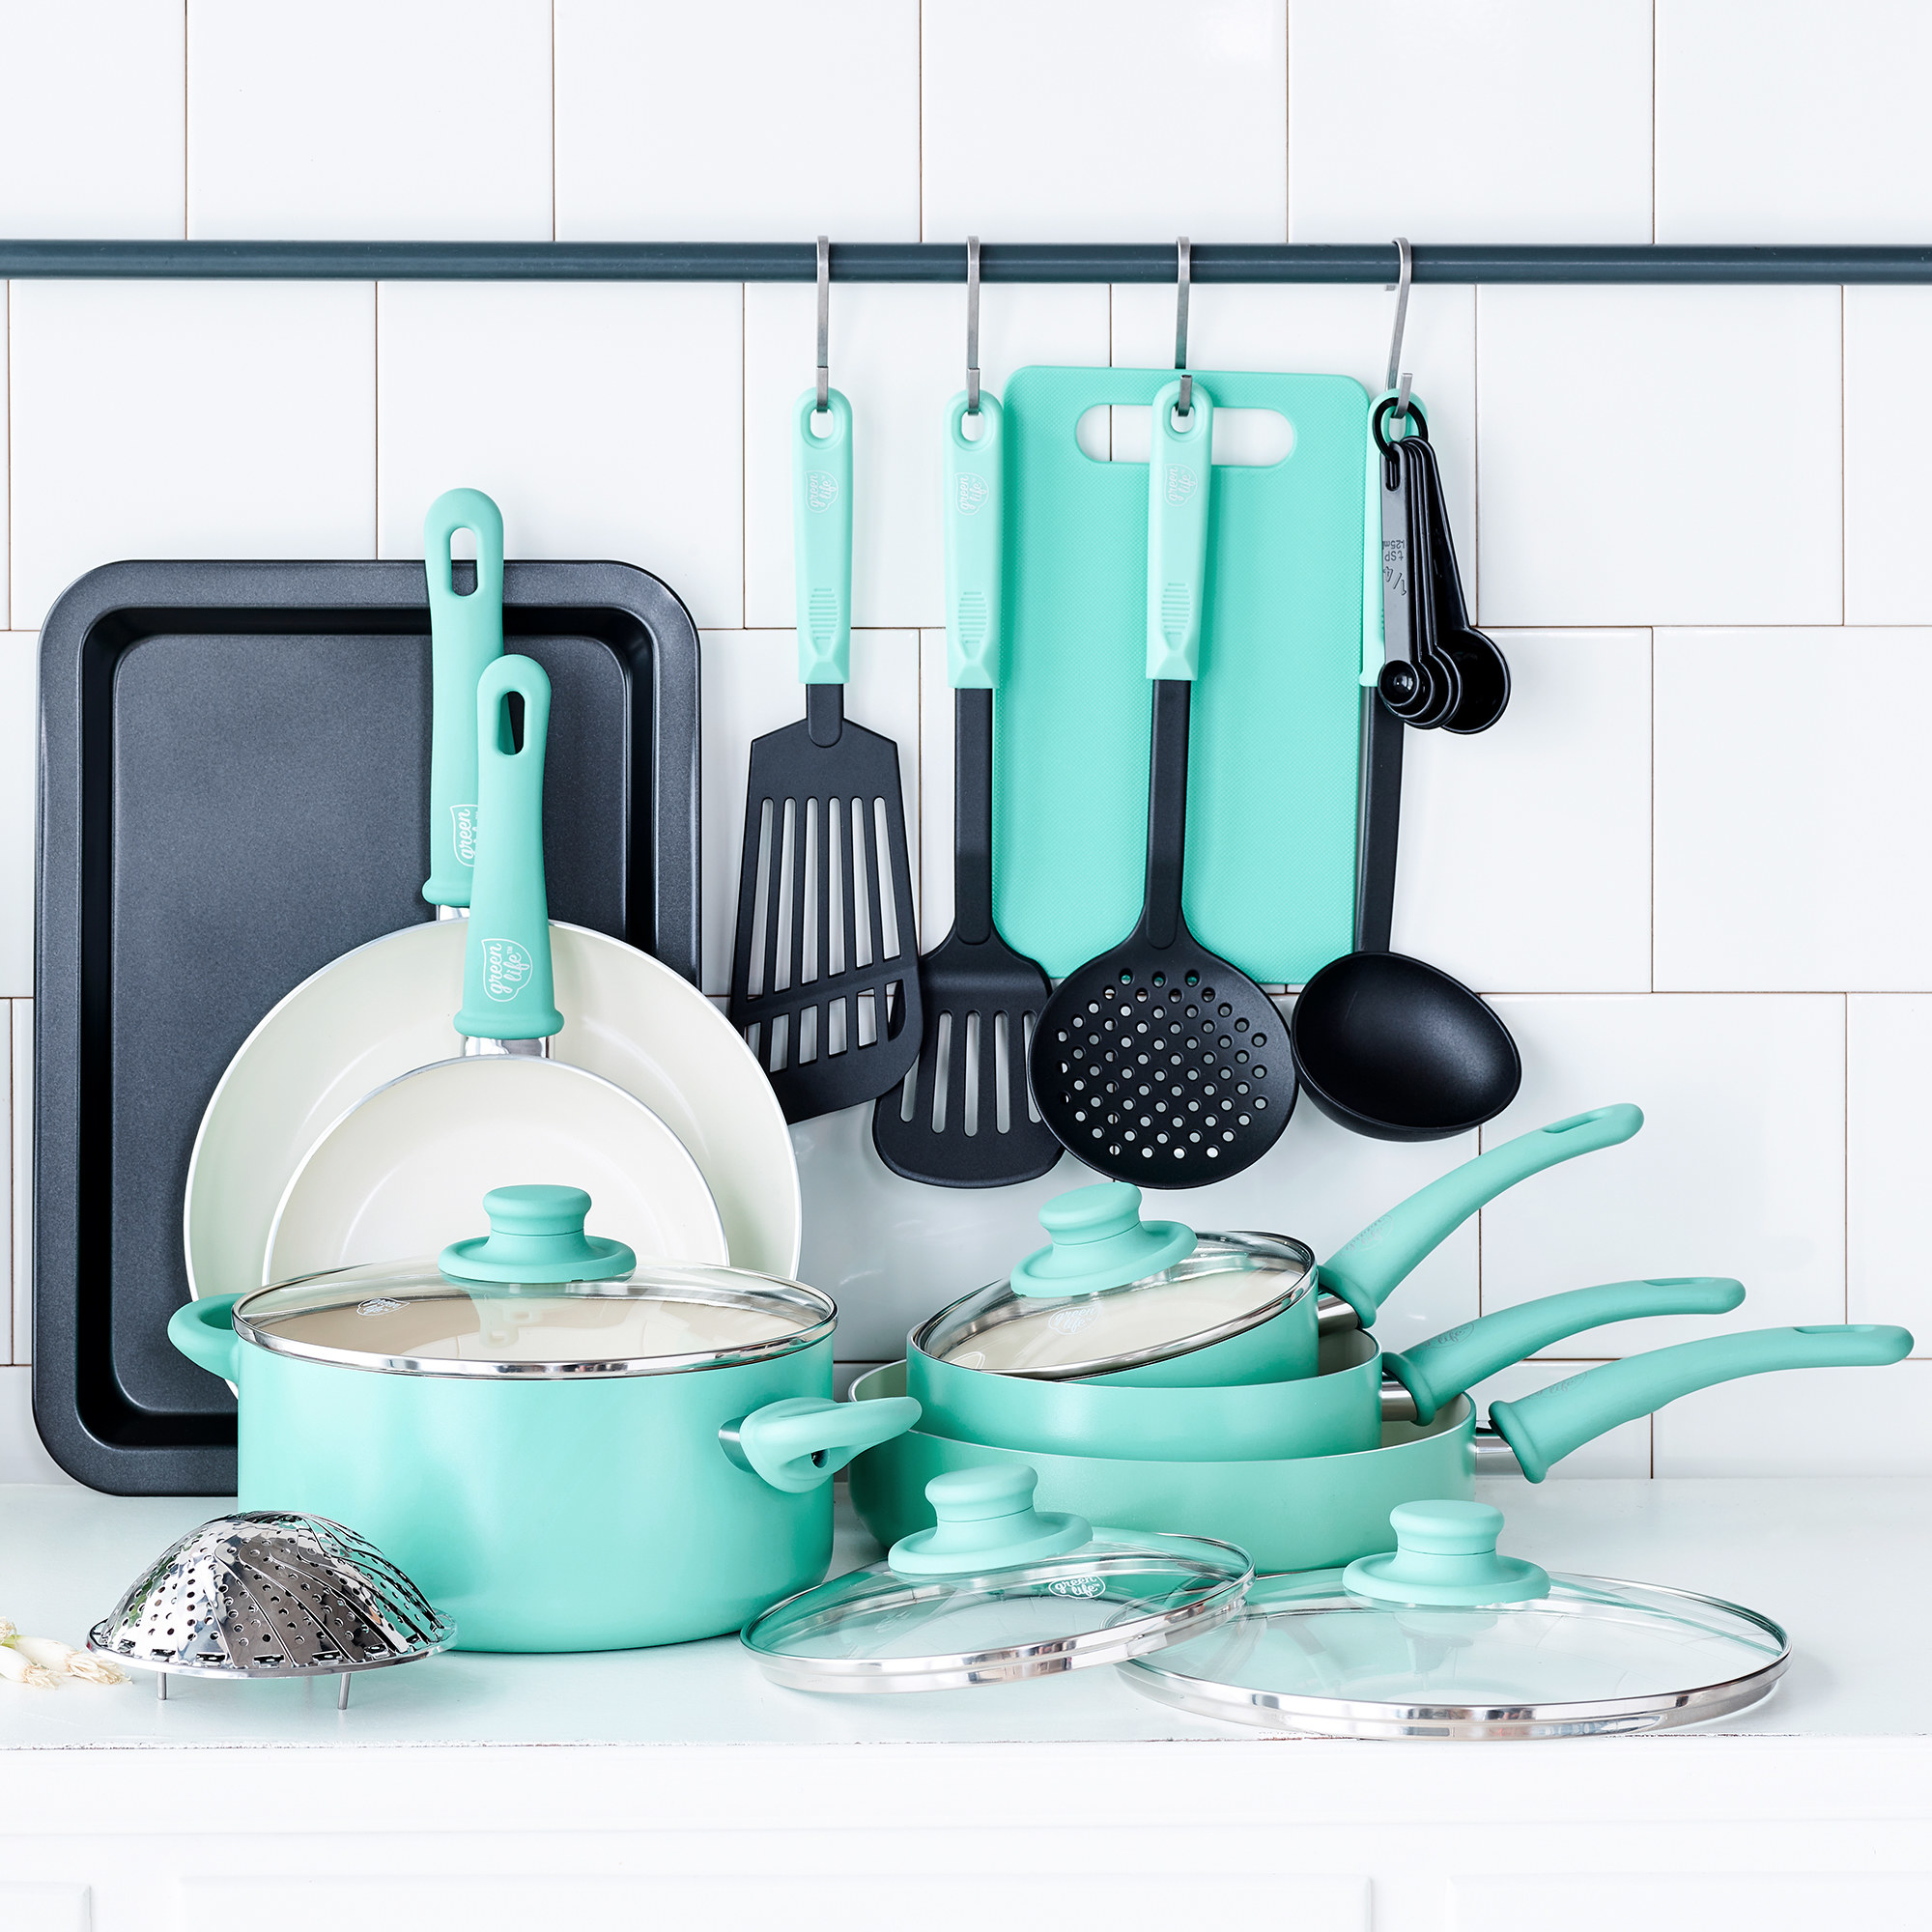 the cookware set in turquoise on a countertop